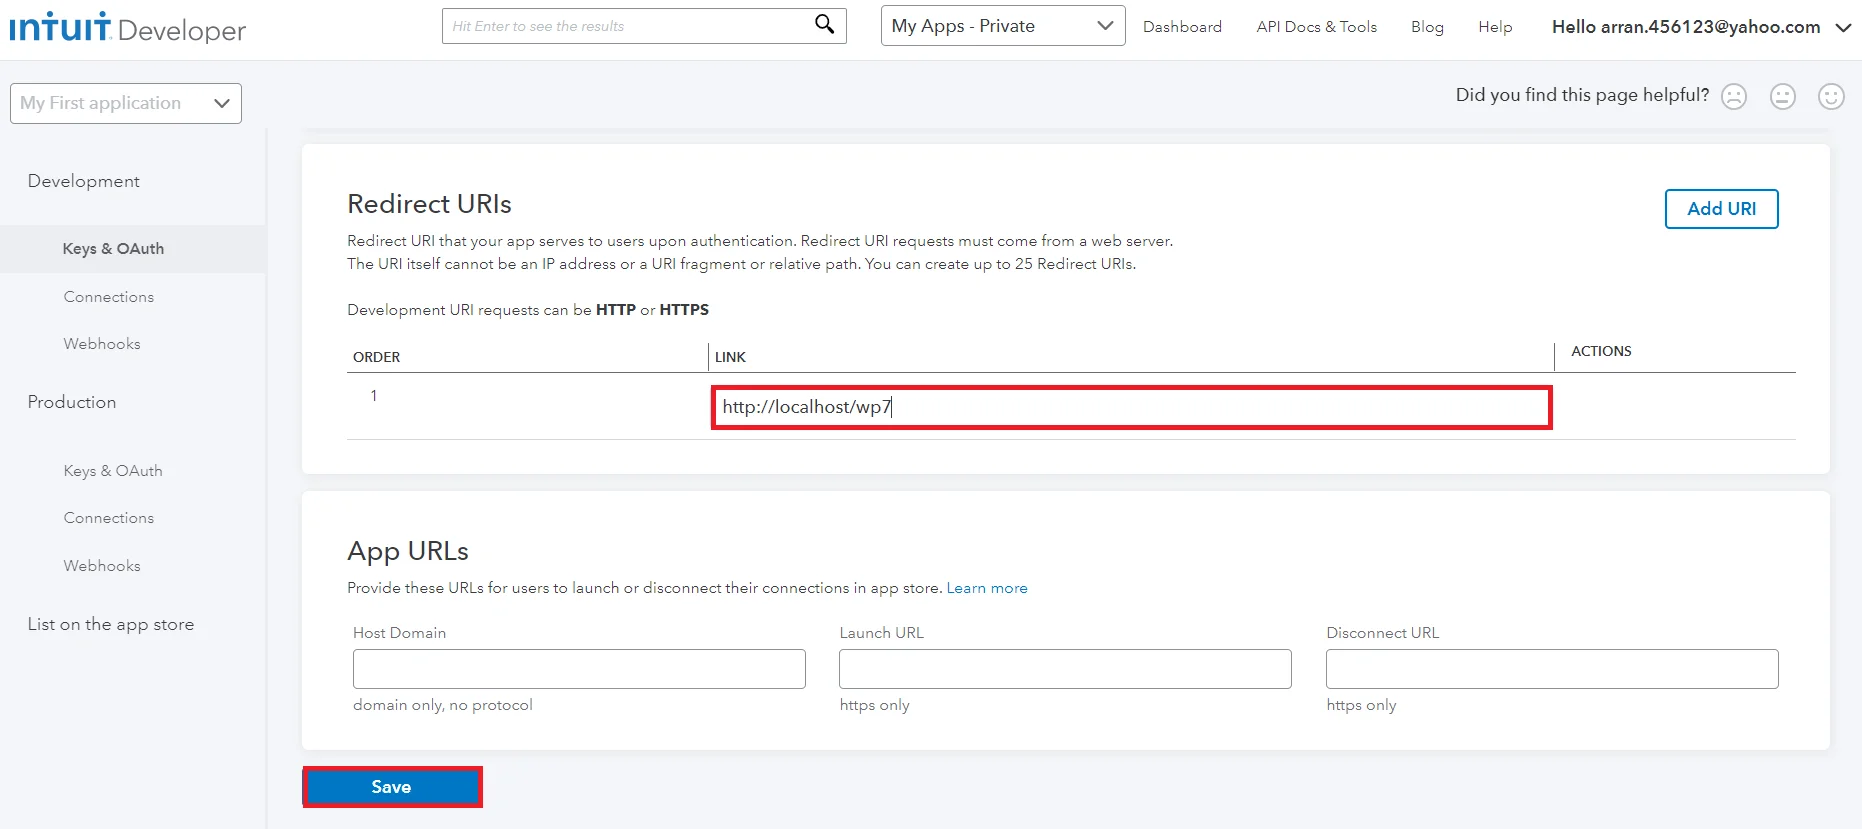 intuit single sign-on sso : save settings